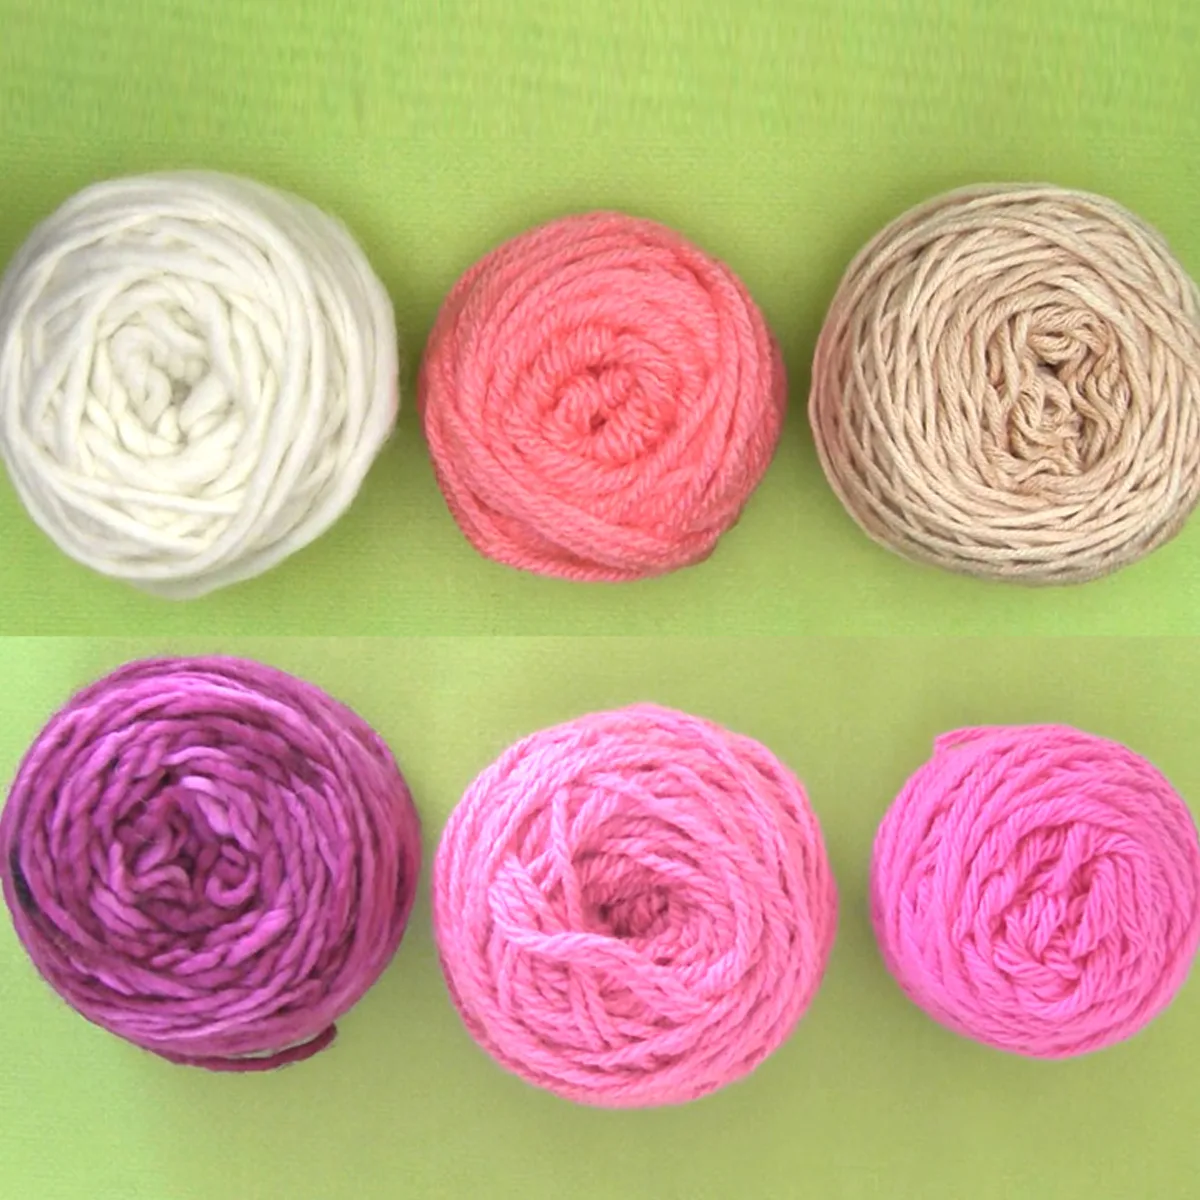 Six yarn balls in purple, pink, and white yarn colors arranged atop a green background.